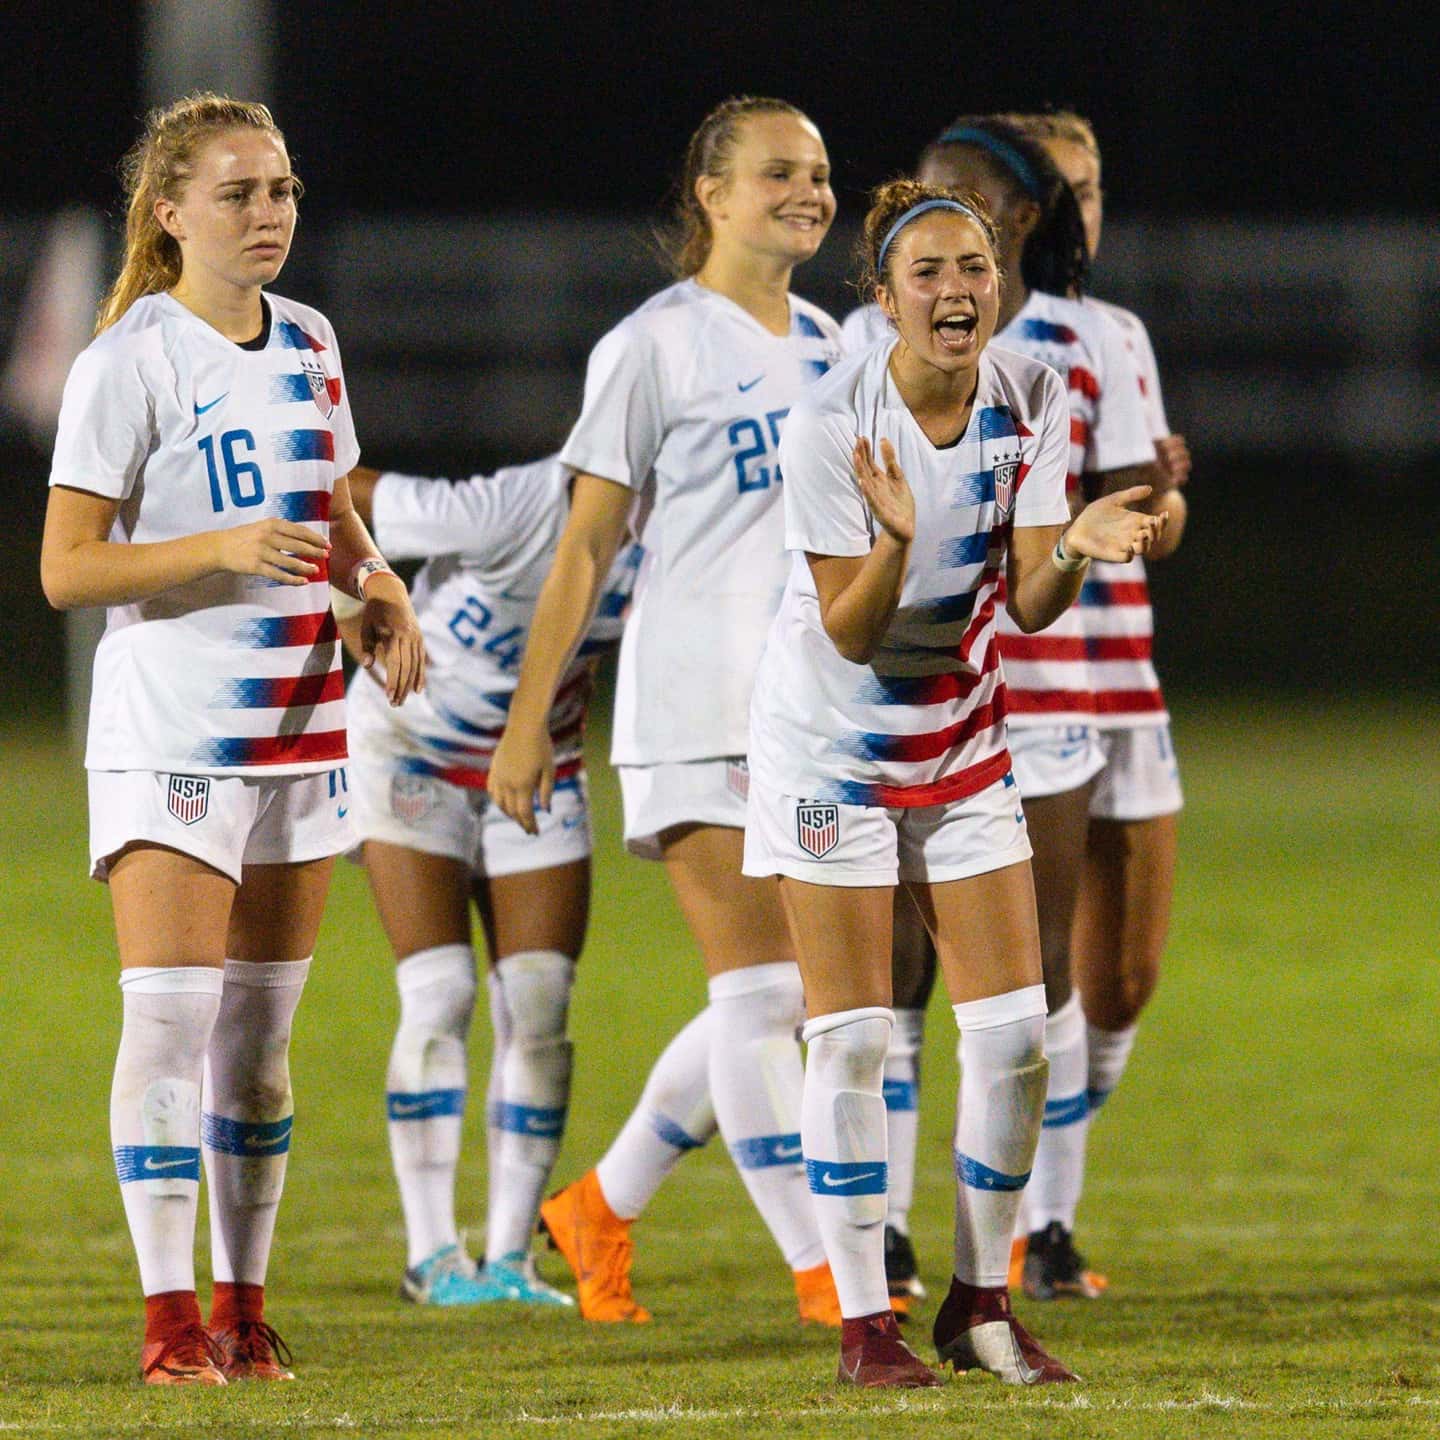 32 Players Gather For U17 USWNT Camp At U.S. Soccer National Training